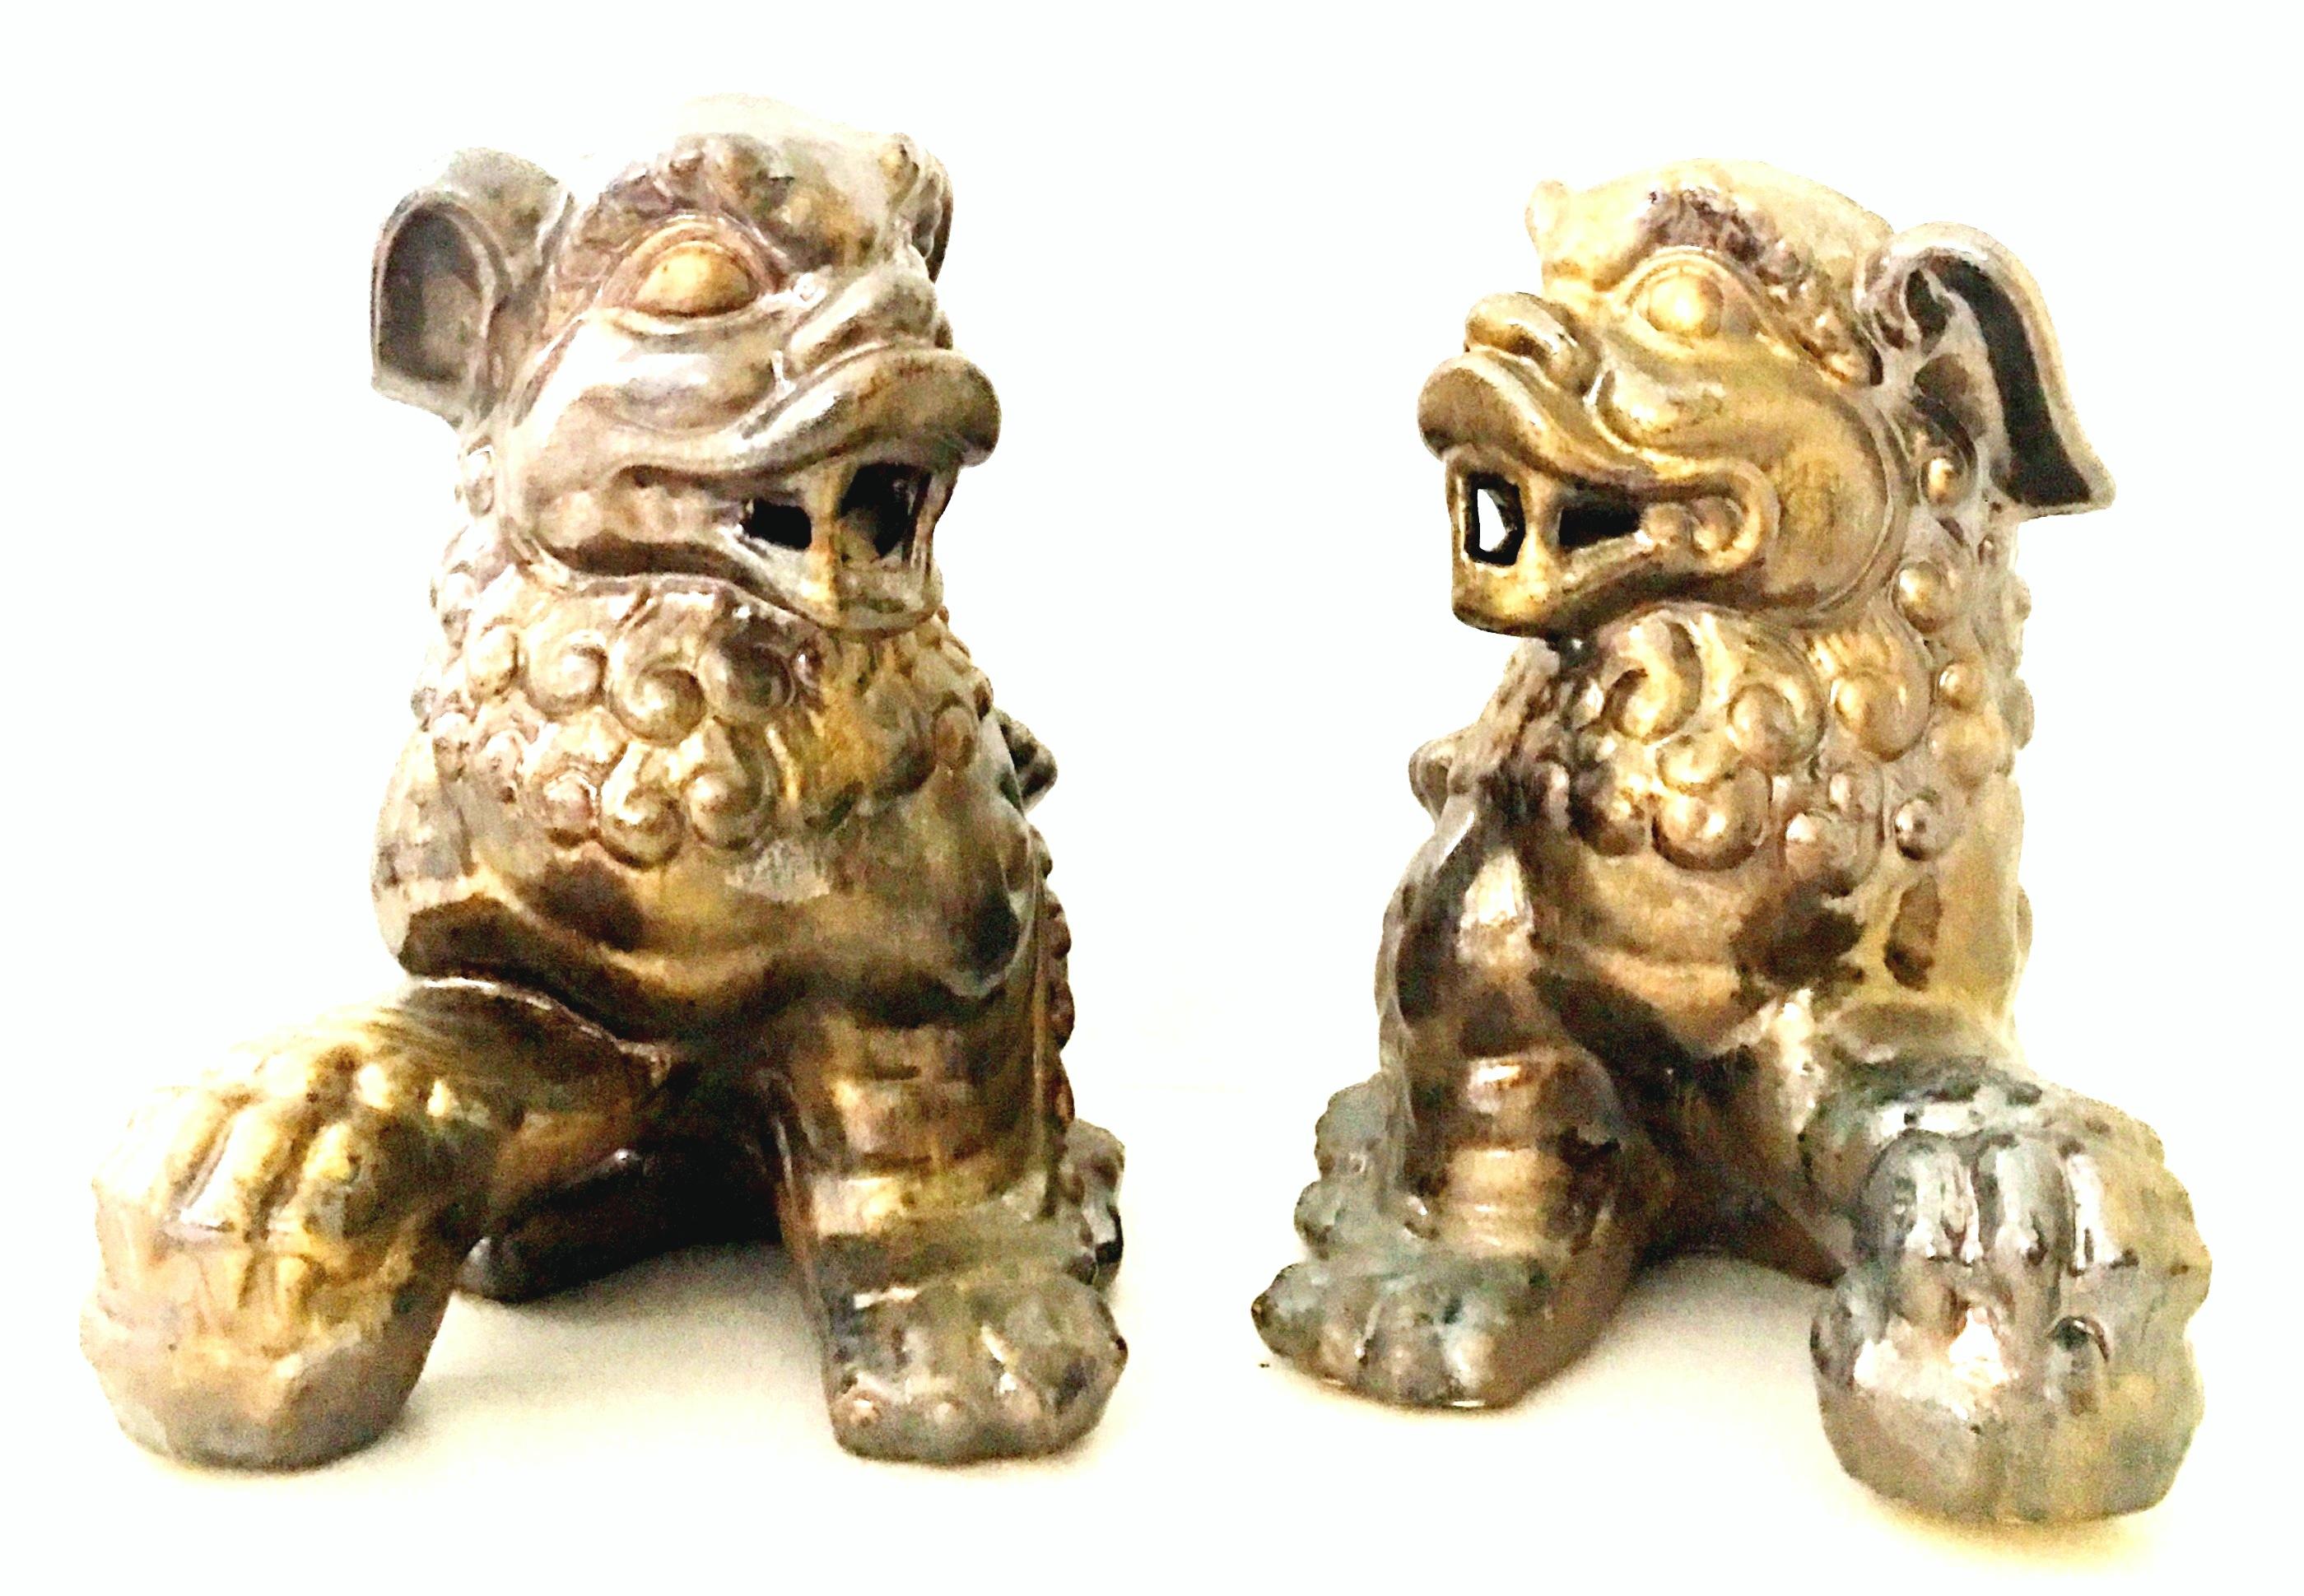 21st Century Contemporary Pair Of Gold Ceramic Glaze Foo Dog Sculptures. This large pair of foo dogs, has a metallic burnished gold gloss finish.